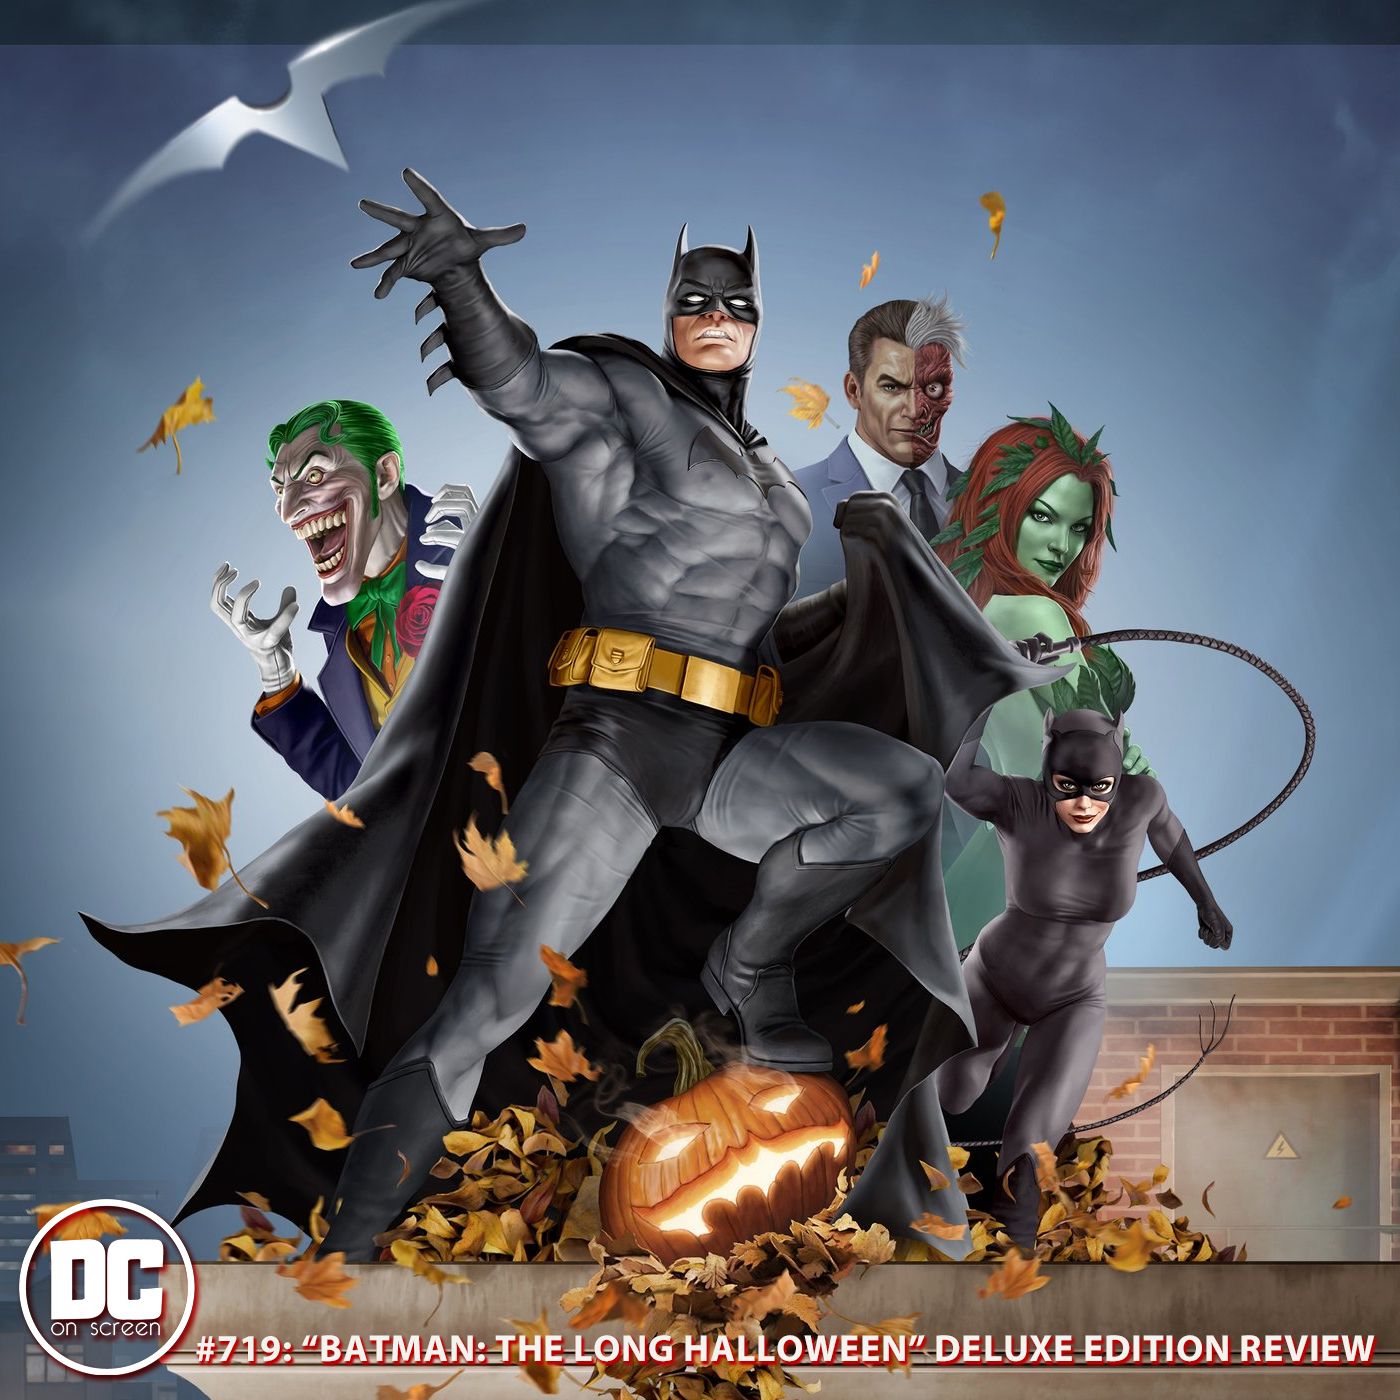 ”Batman: The Long Halloween” Deluxe Edition Review